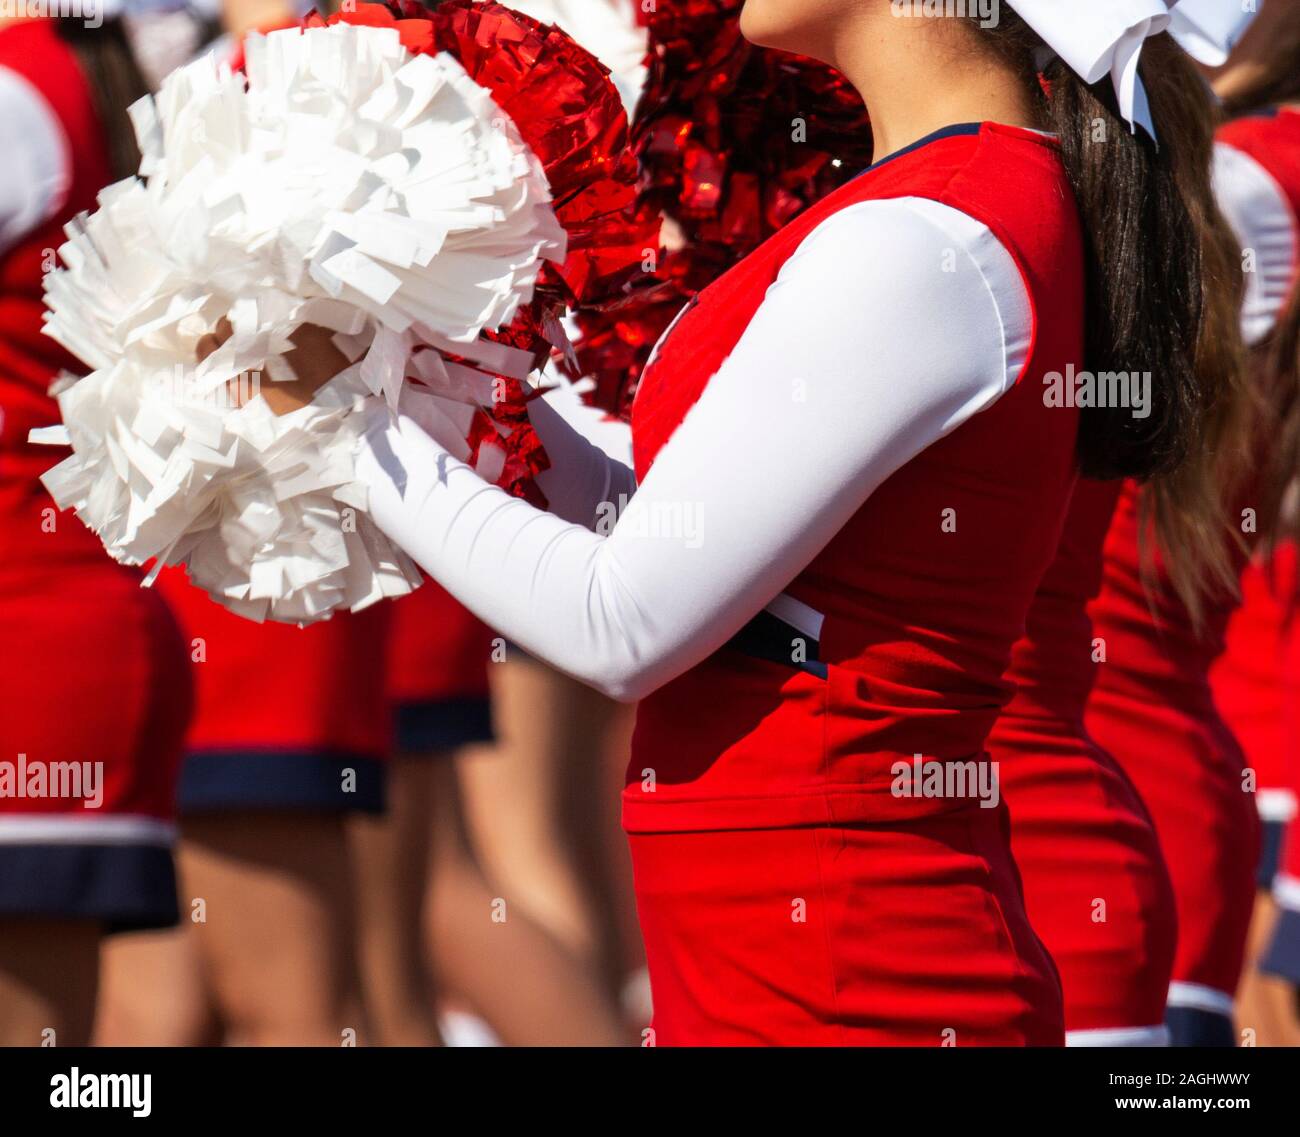 A high school cheerleader is facing the stands cheering for her team with red and white pom poms. Stock Photo